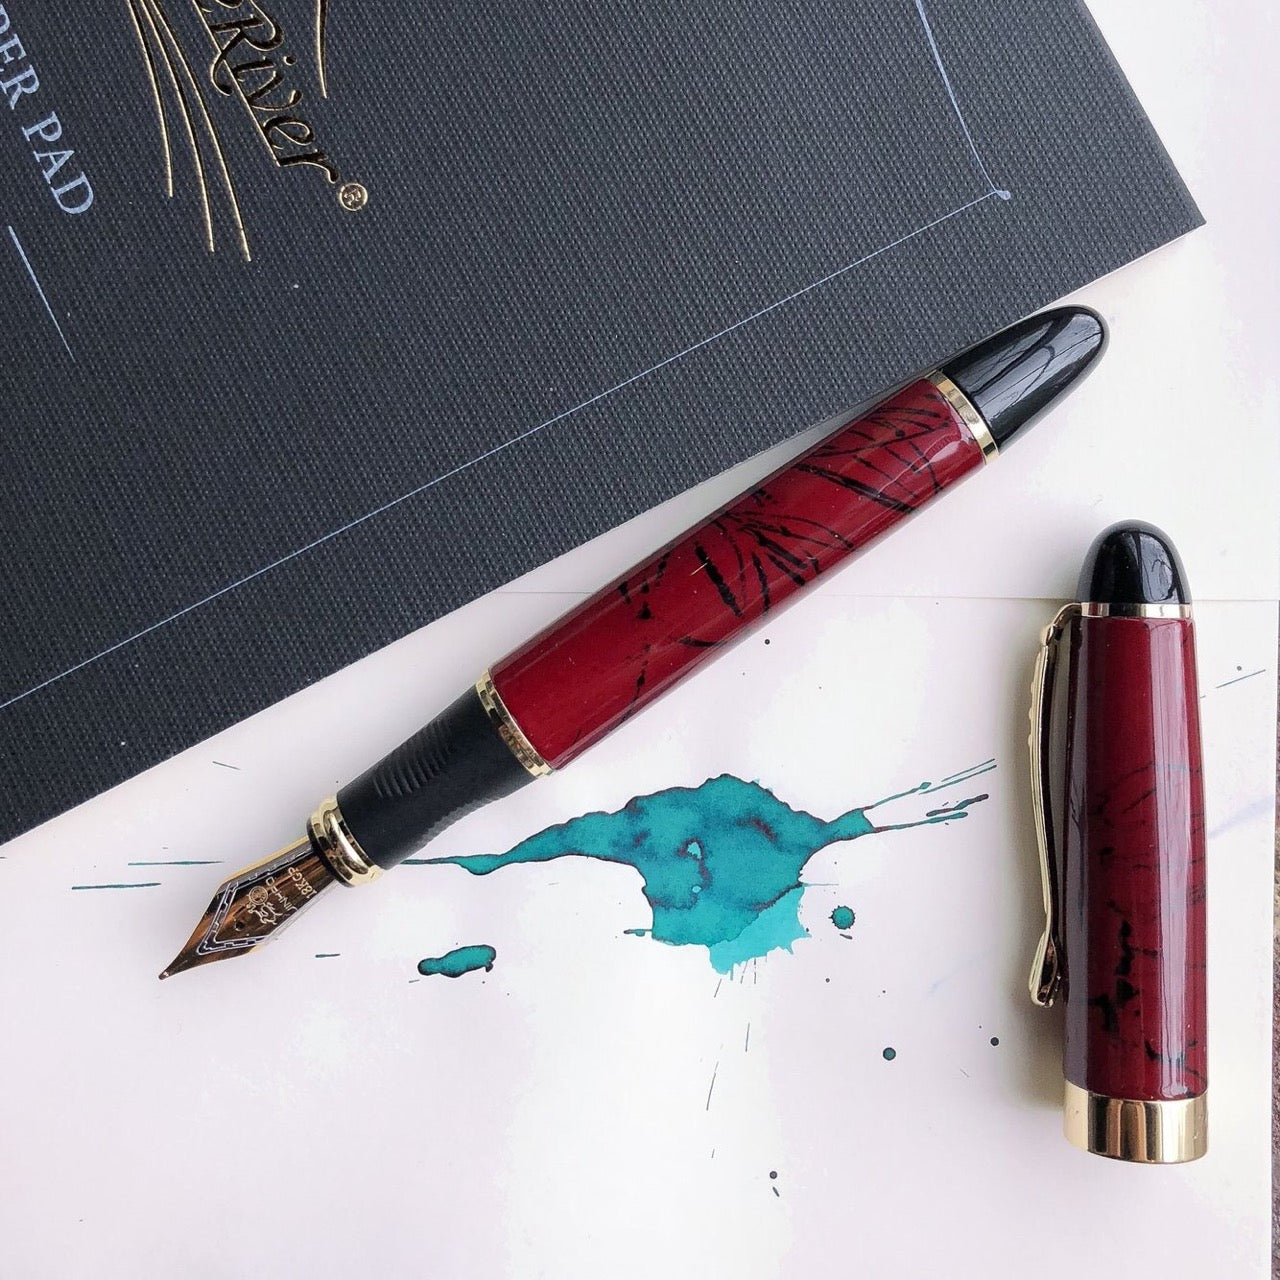 Montegrappa Fortuna Missing Correct Finial? - Fountain & Dip Pens